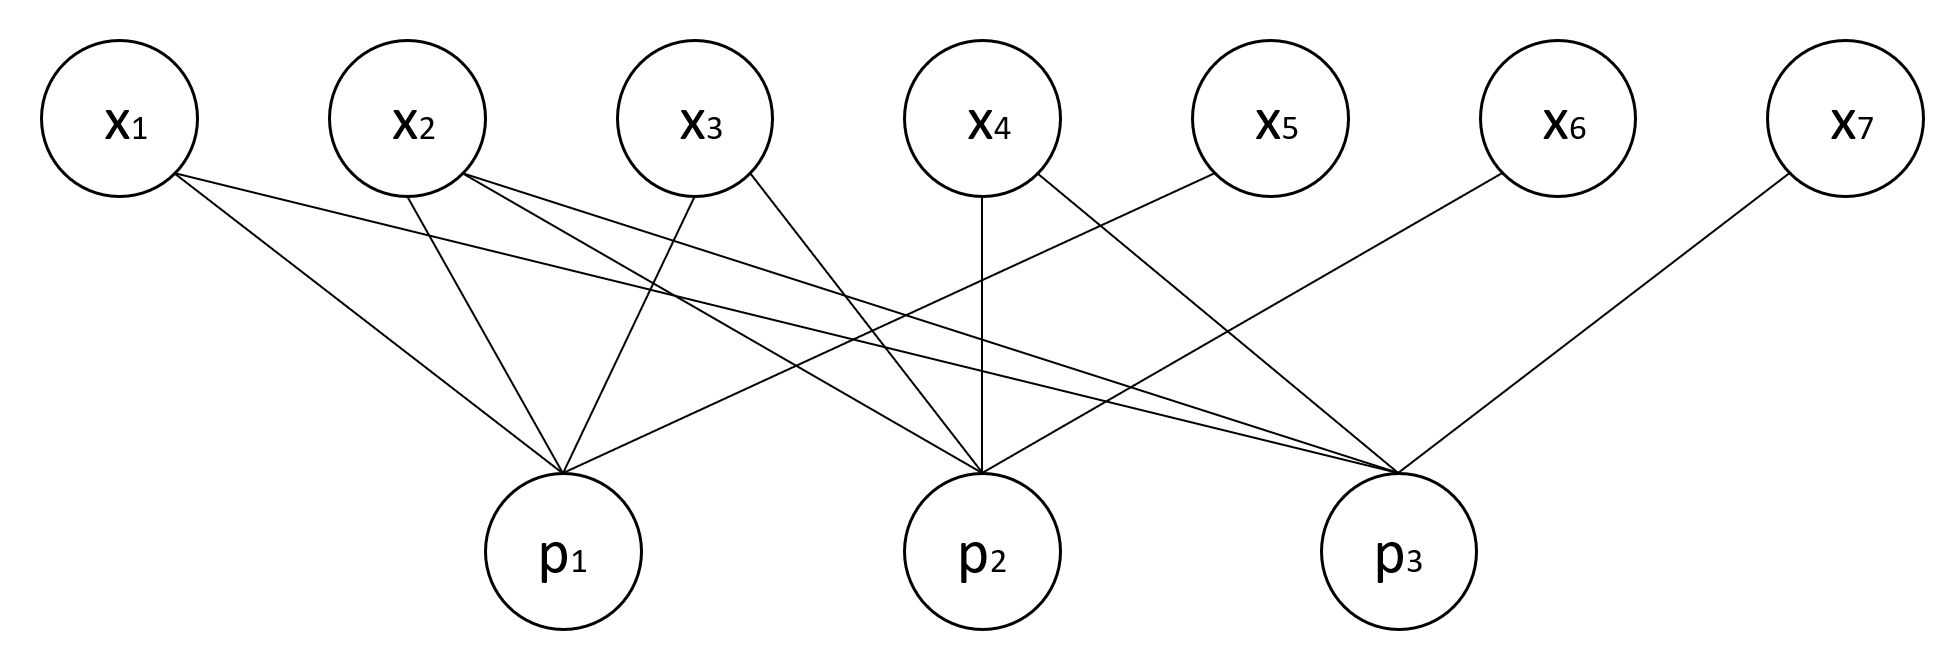 Tanner graph for (7,4,3) Hamming code